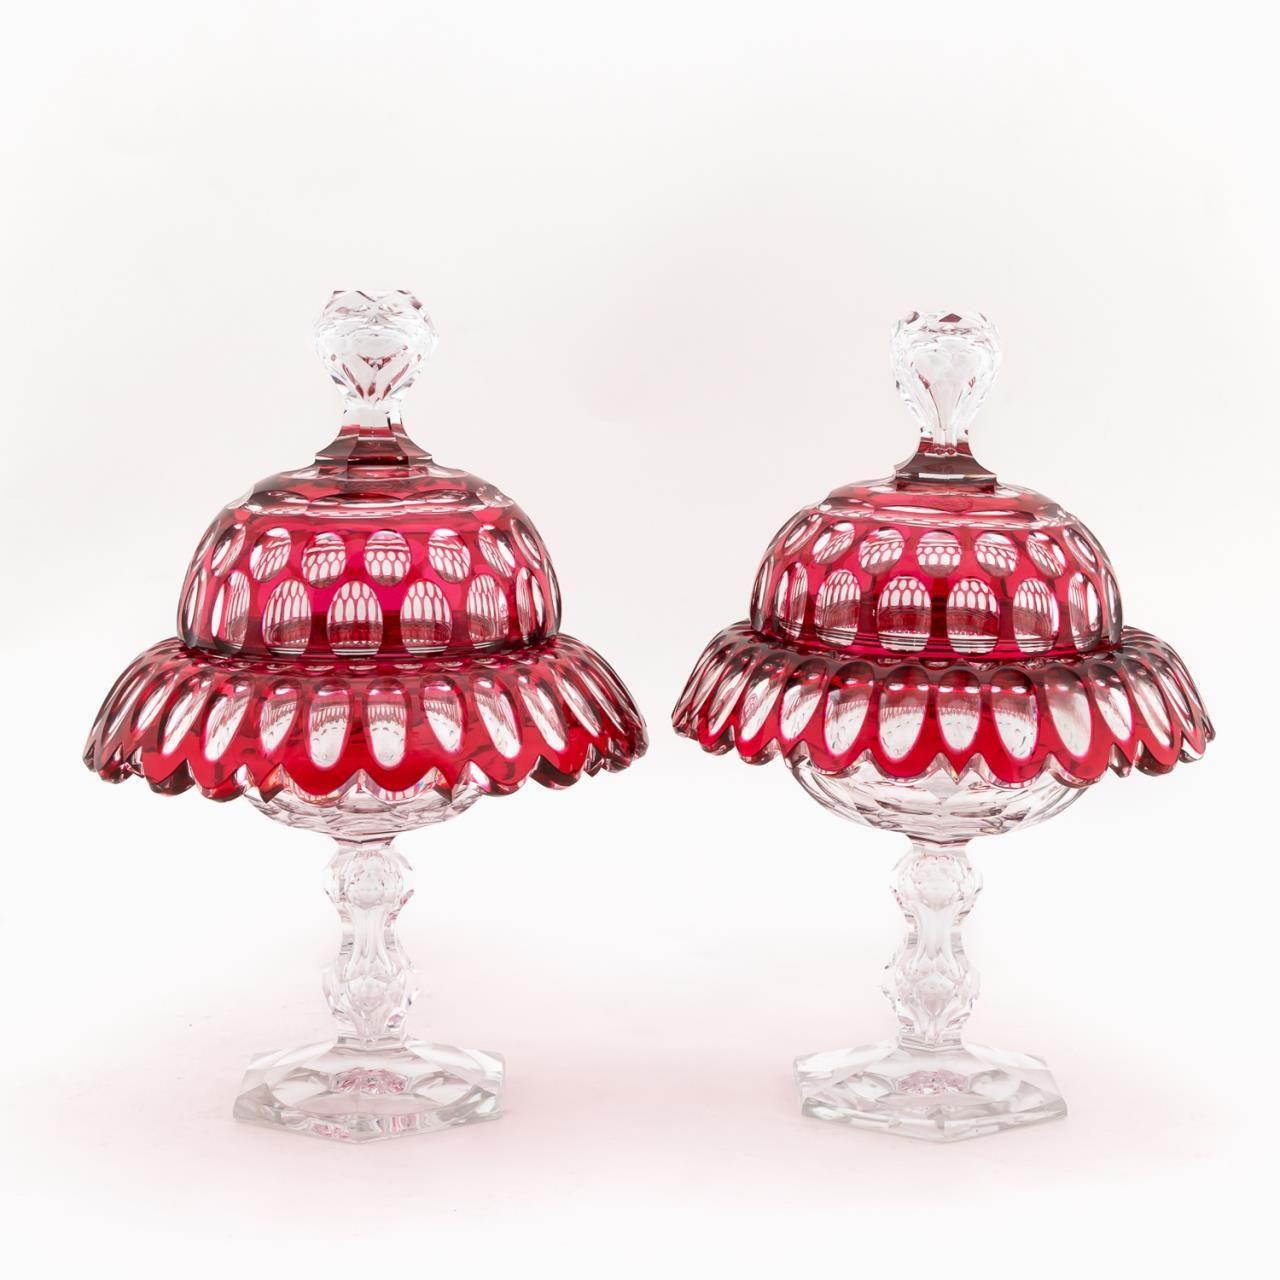 19th Century Pair of Bohemian Cranberry Cut Glass Lidded Compotes